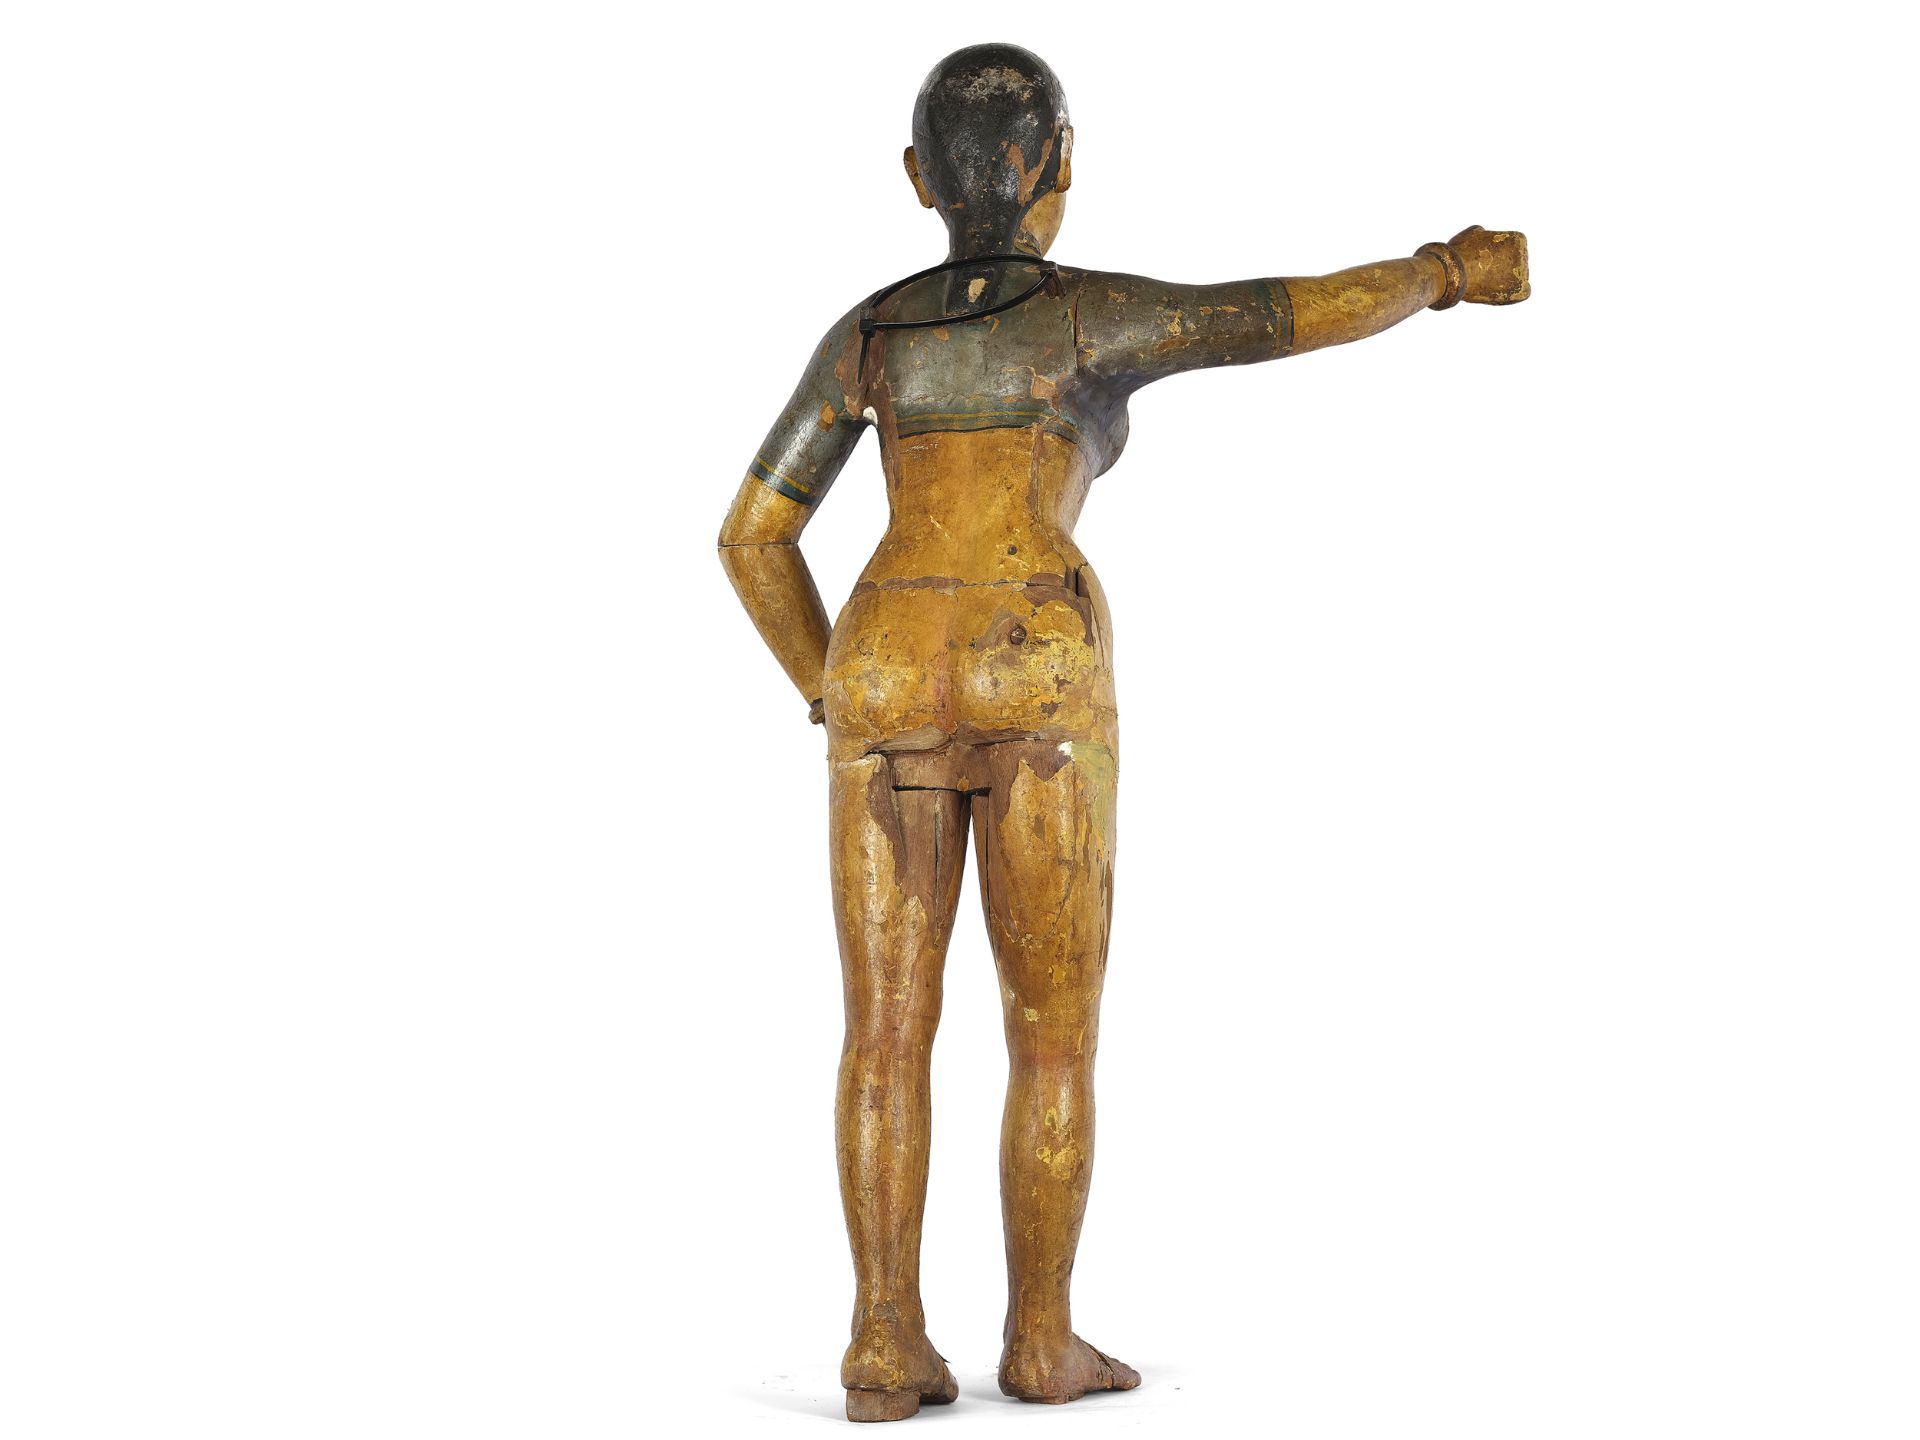 Large figure of an Indian temple dancer, India, 19th century - Image 3 of 4